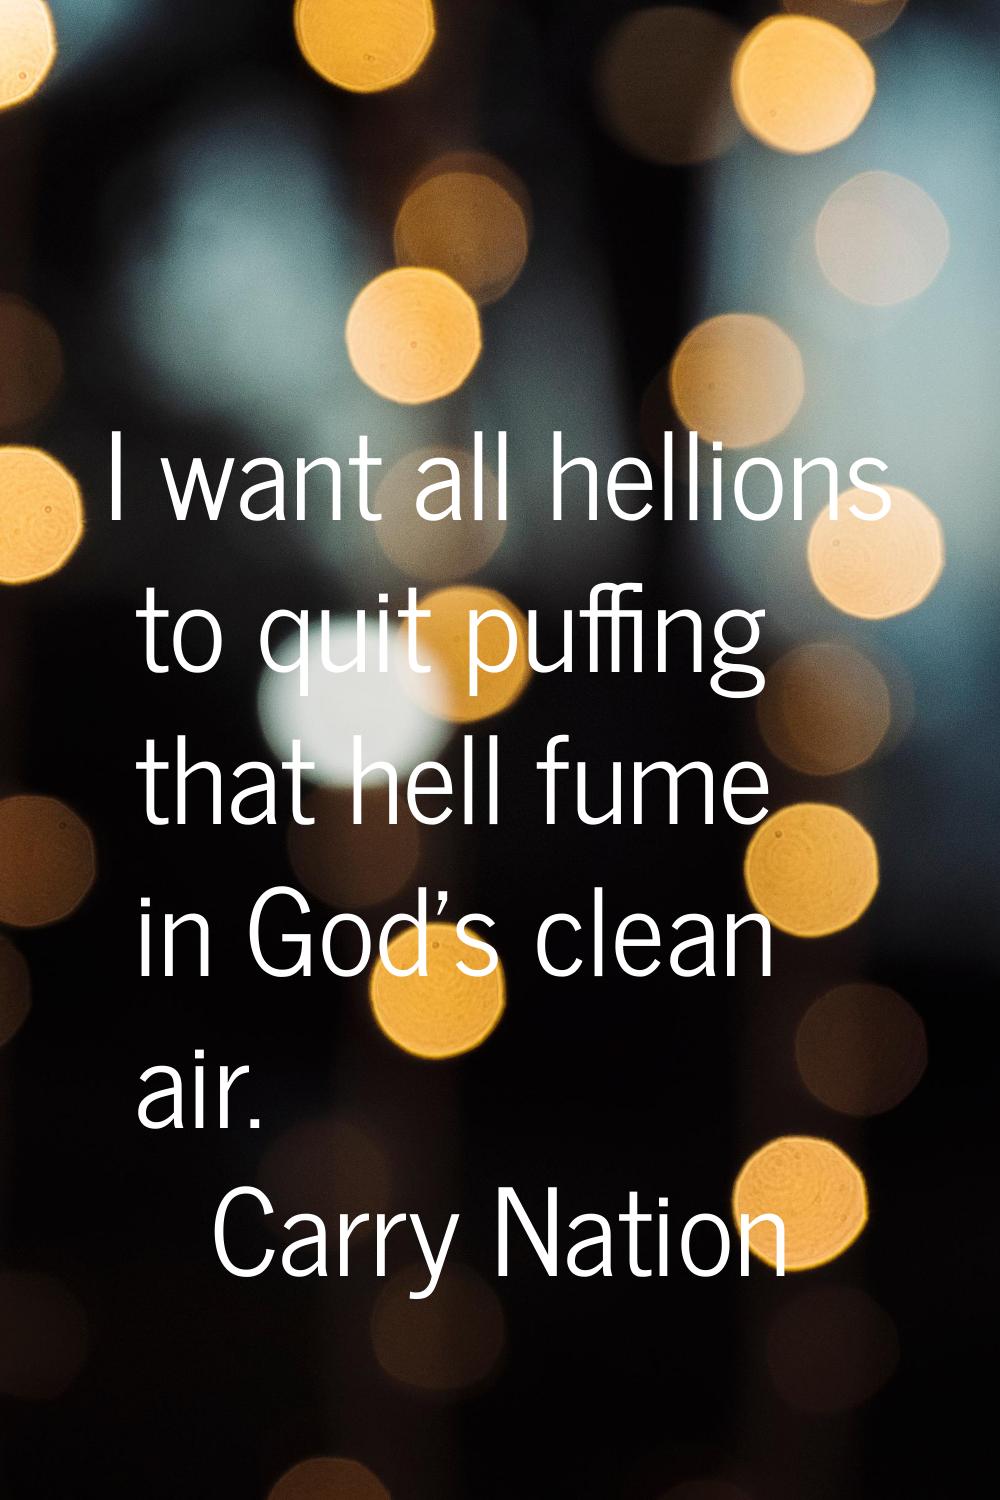 I want all hellions to quit puffing that hell fume in God's clean air.